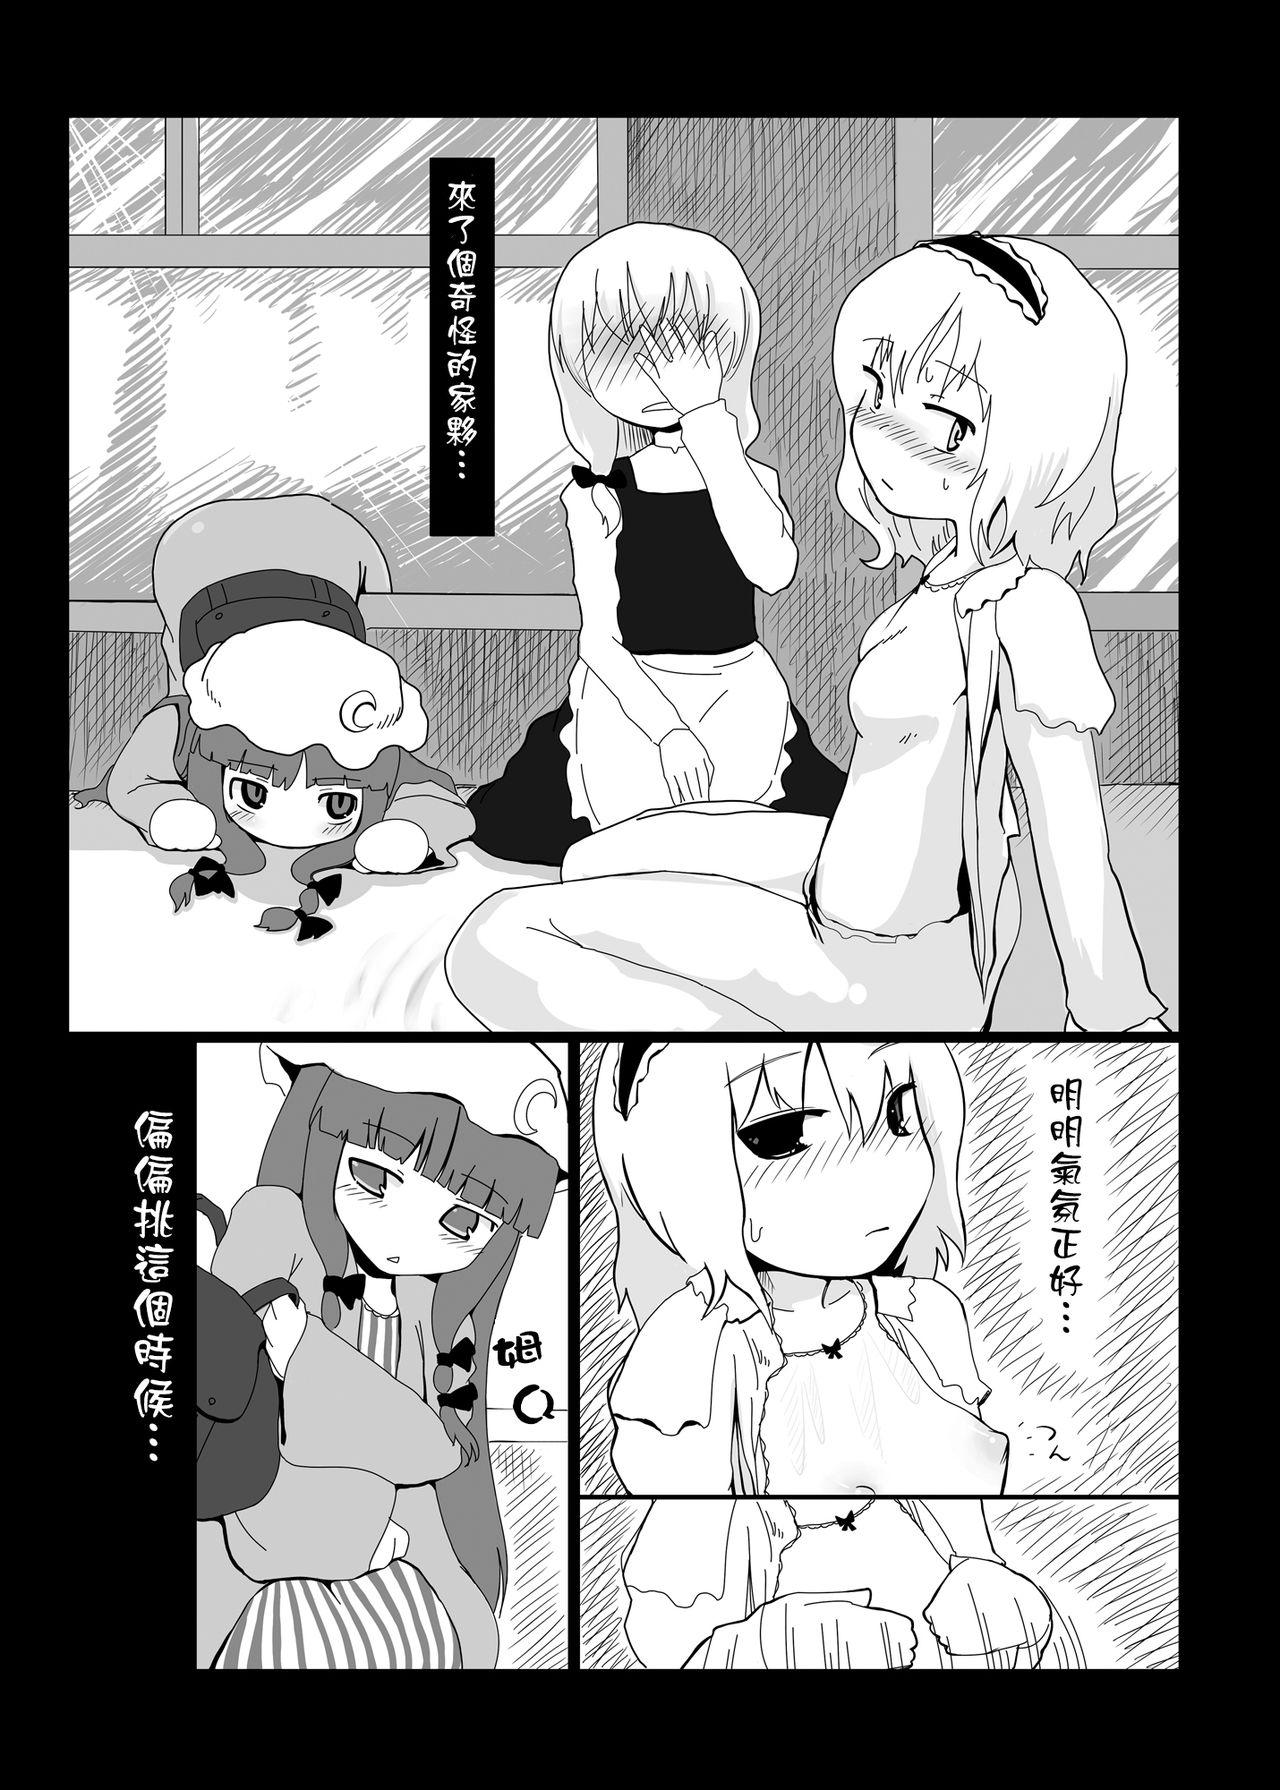 Transsexual Touhou Ero Atsume. - Touhou project Strap On - Page 9